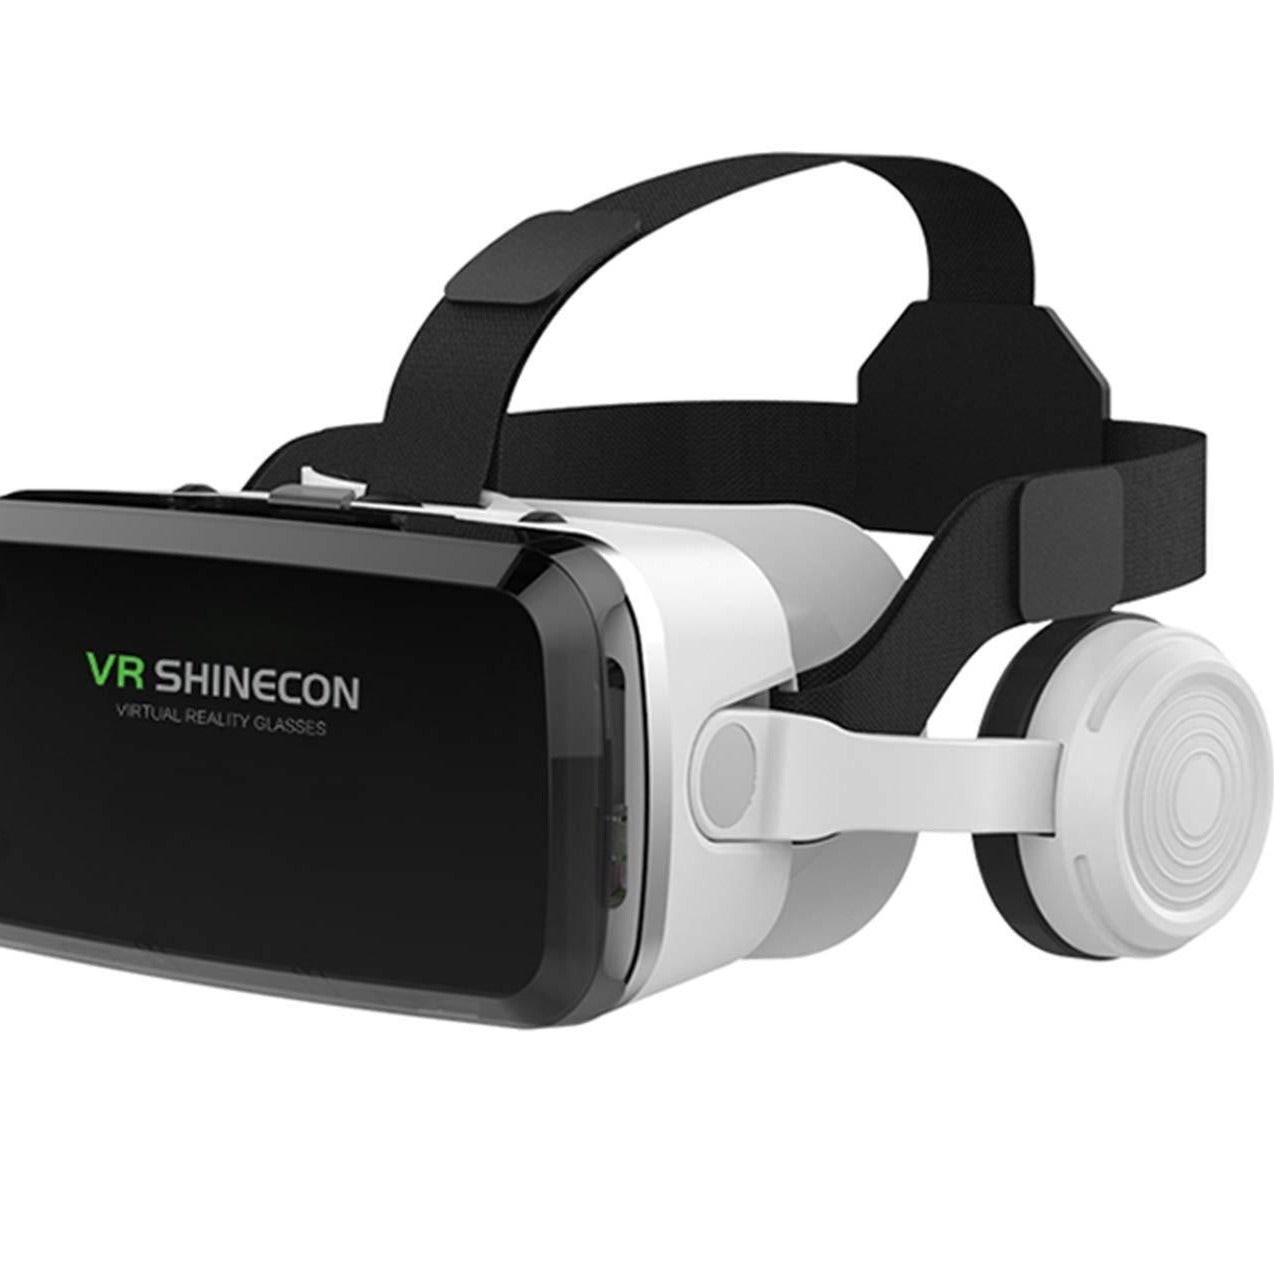 VR SHINECON Headset +Bluetooth 3D Glasses Goggles HD Virtual Reality Headset Compatible with iOS & Android Phone Eye Protected Soft & Comfortable Adjustable Distance for Phones 4.7-6.7"[2021  - Home Decor Gifts and More